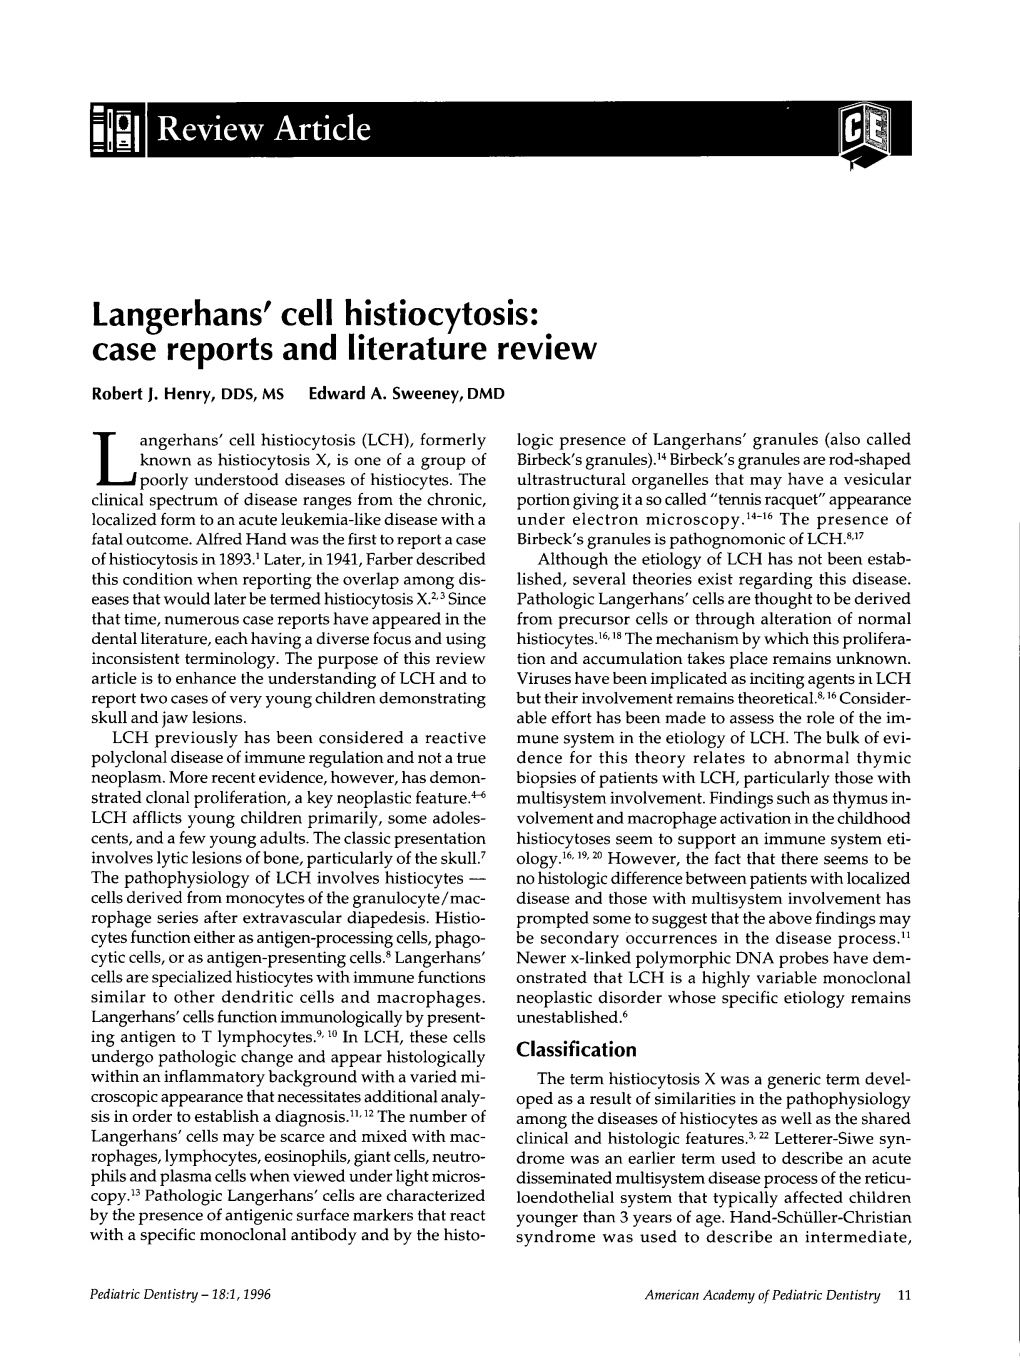 Langerhans' Cell Histiocytosis Was Made Based on Skin Biopsy of the Abdomen and Needle Biopsy of the Liver, Both Suggestive of LCH